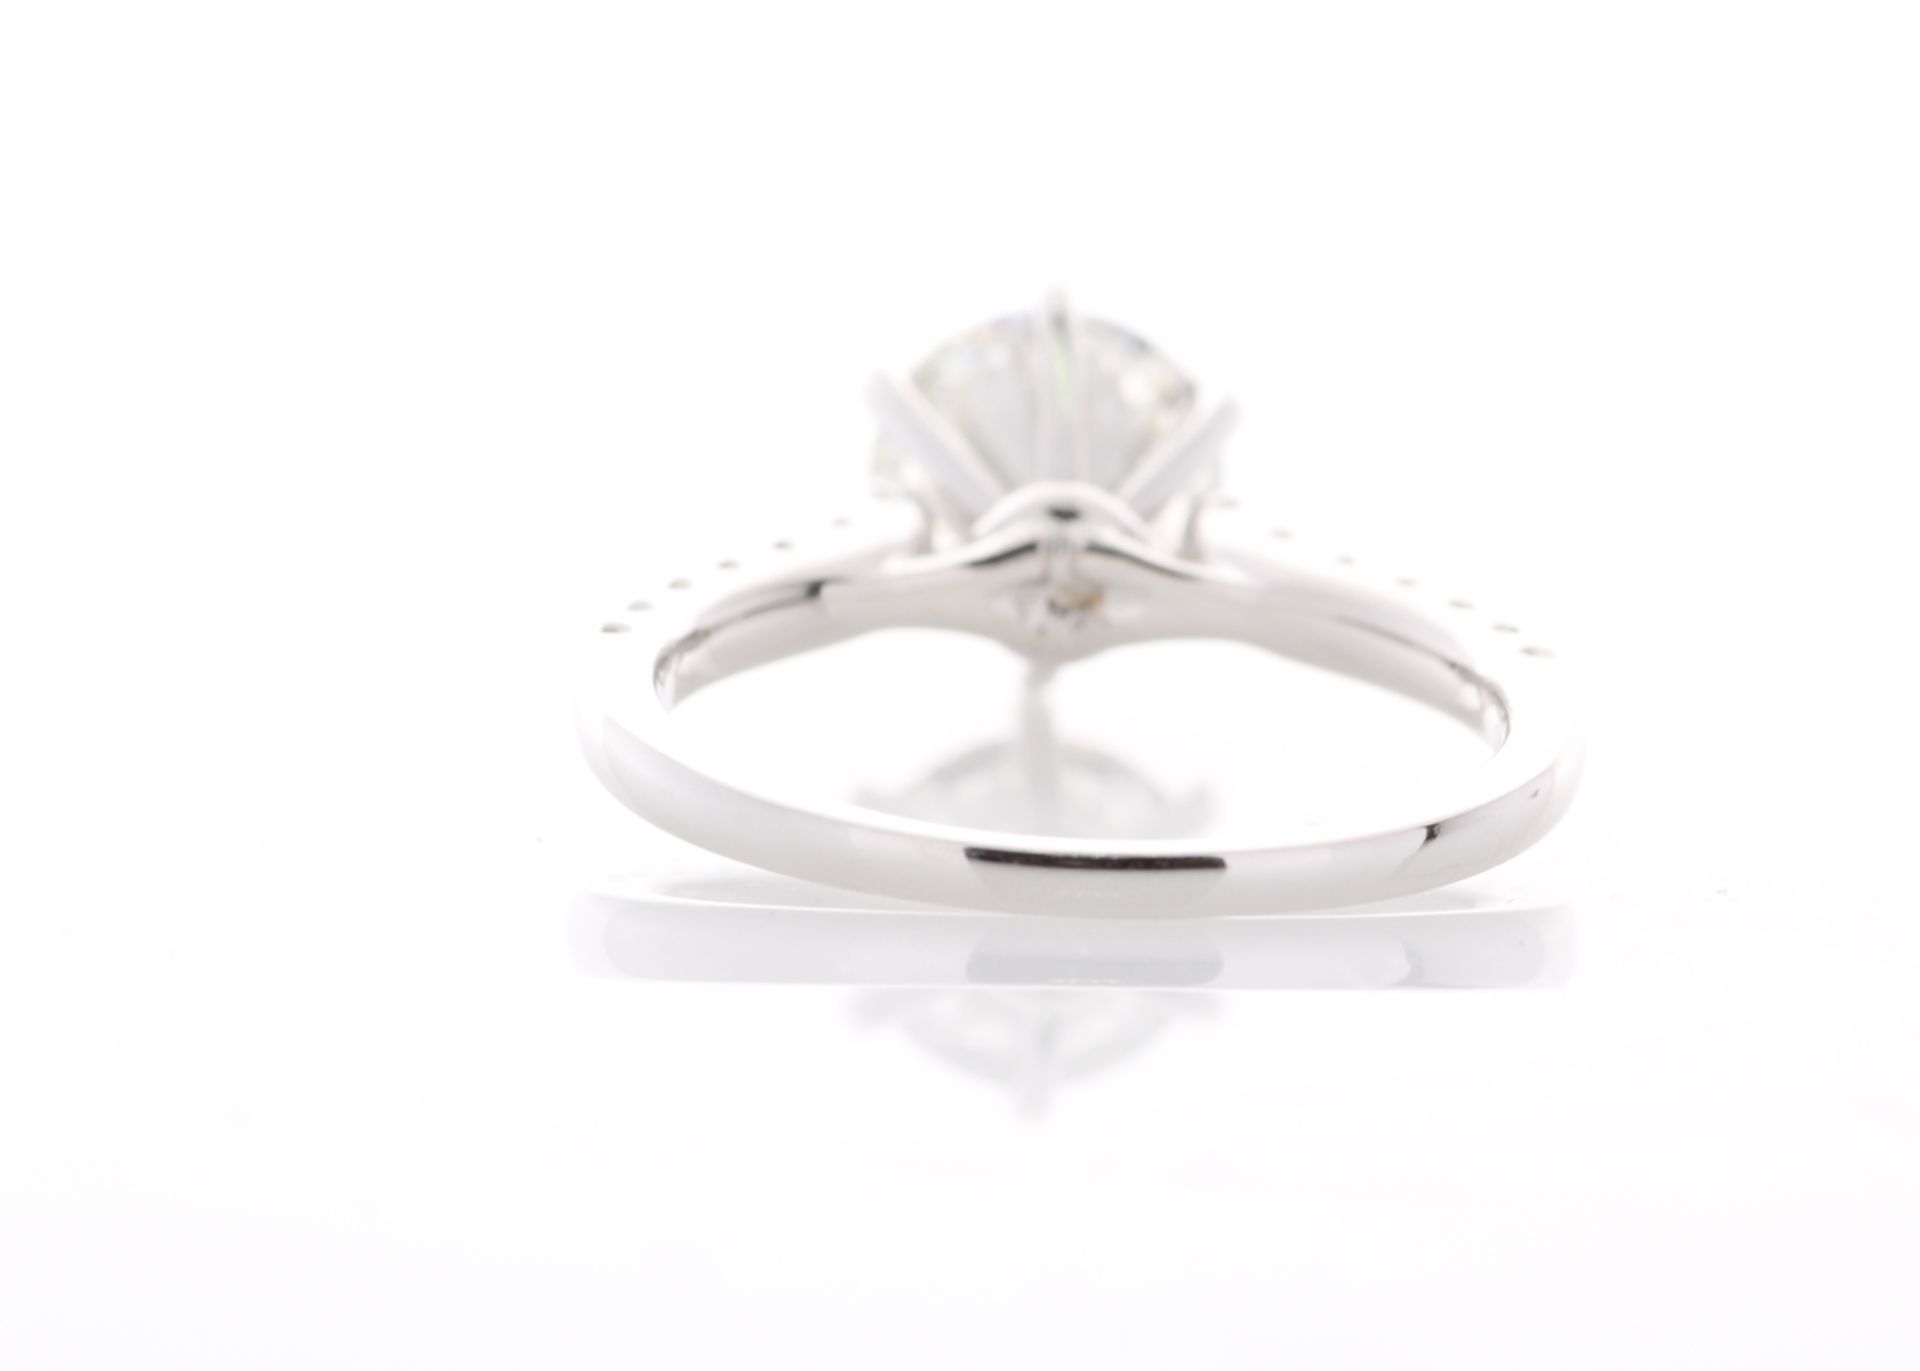 18ct White Gold Single Stone With Stone Set Shoulders Diamond Ring (1.56) 1.85 Carats - Image 3 of 5